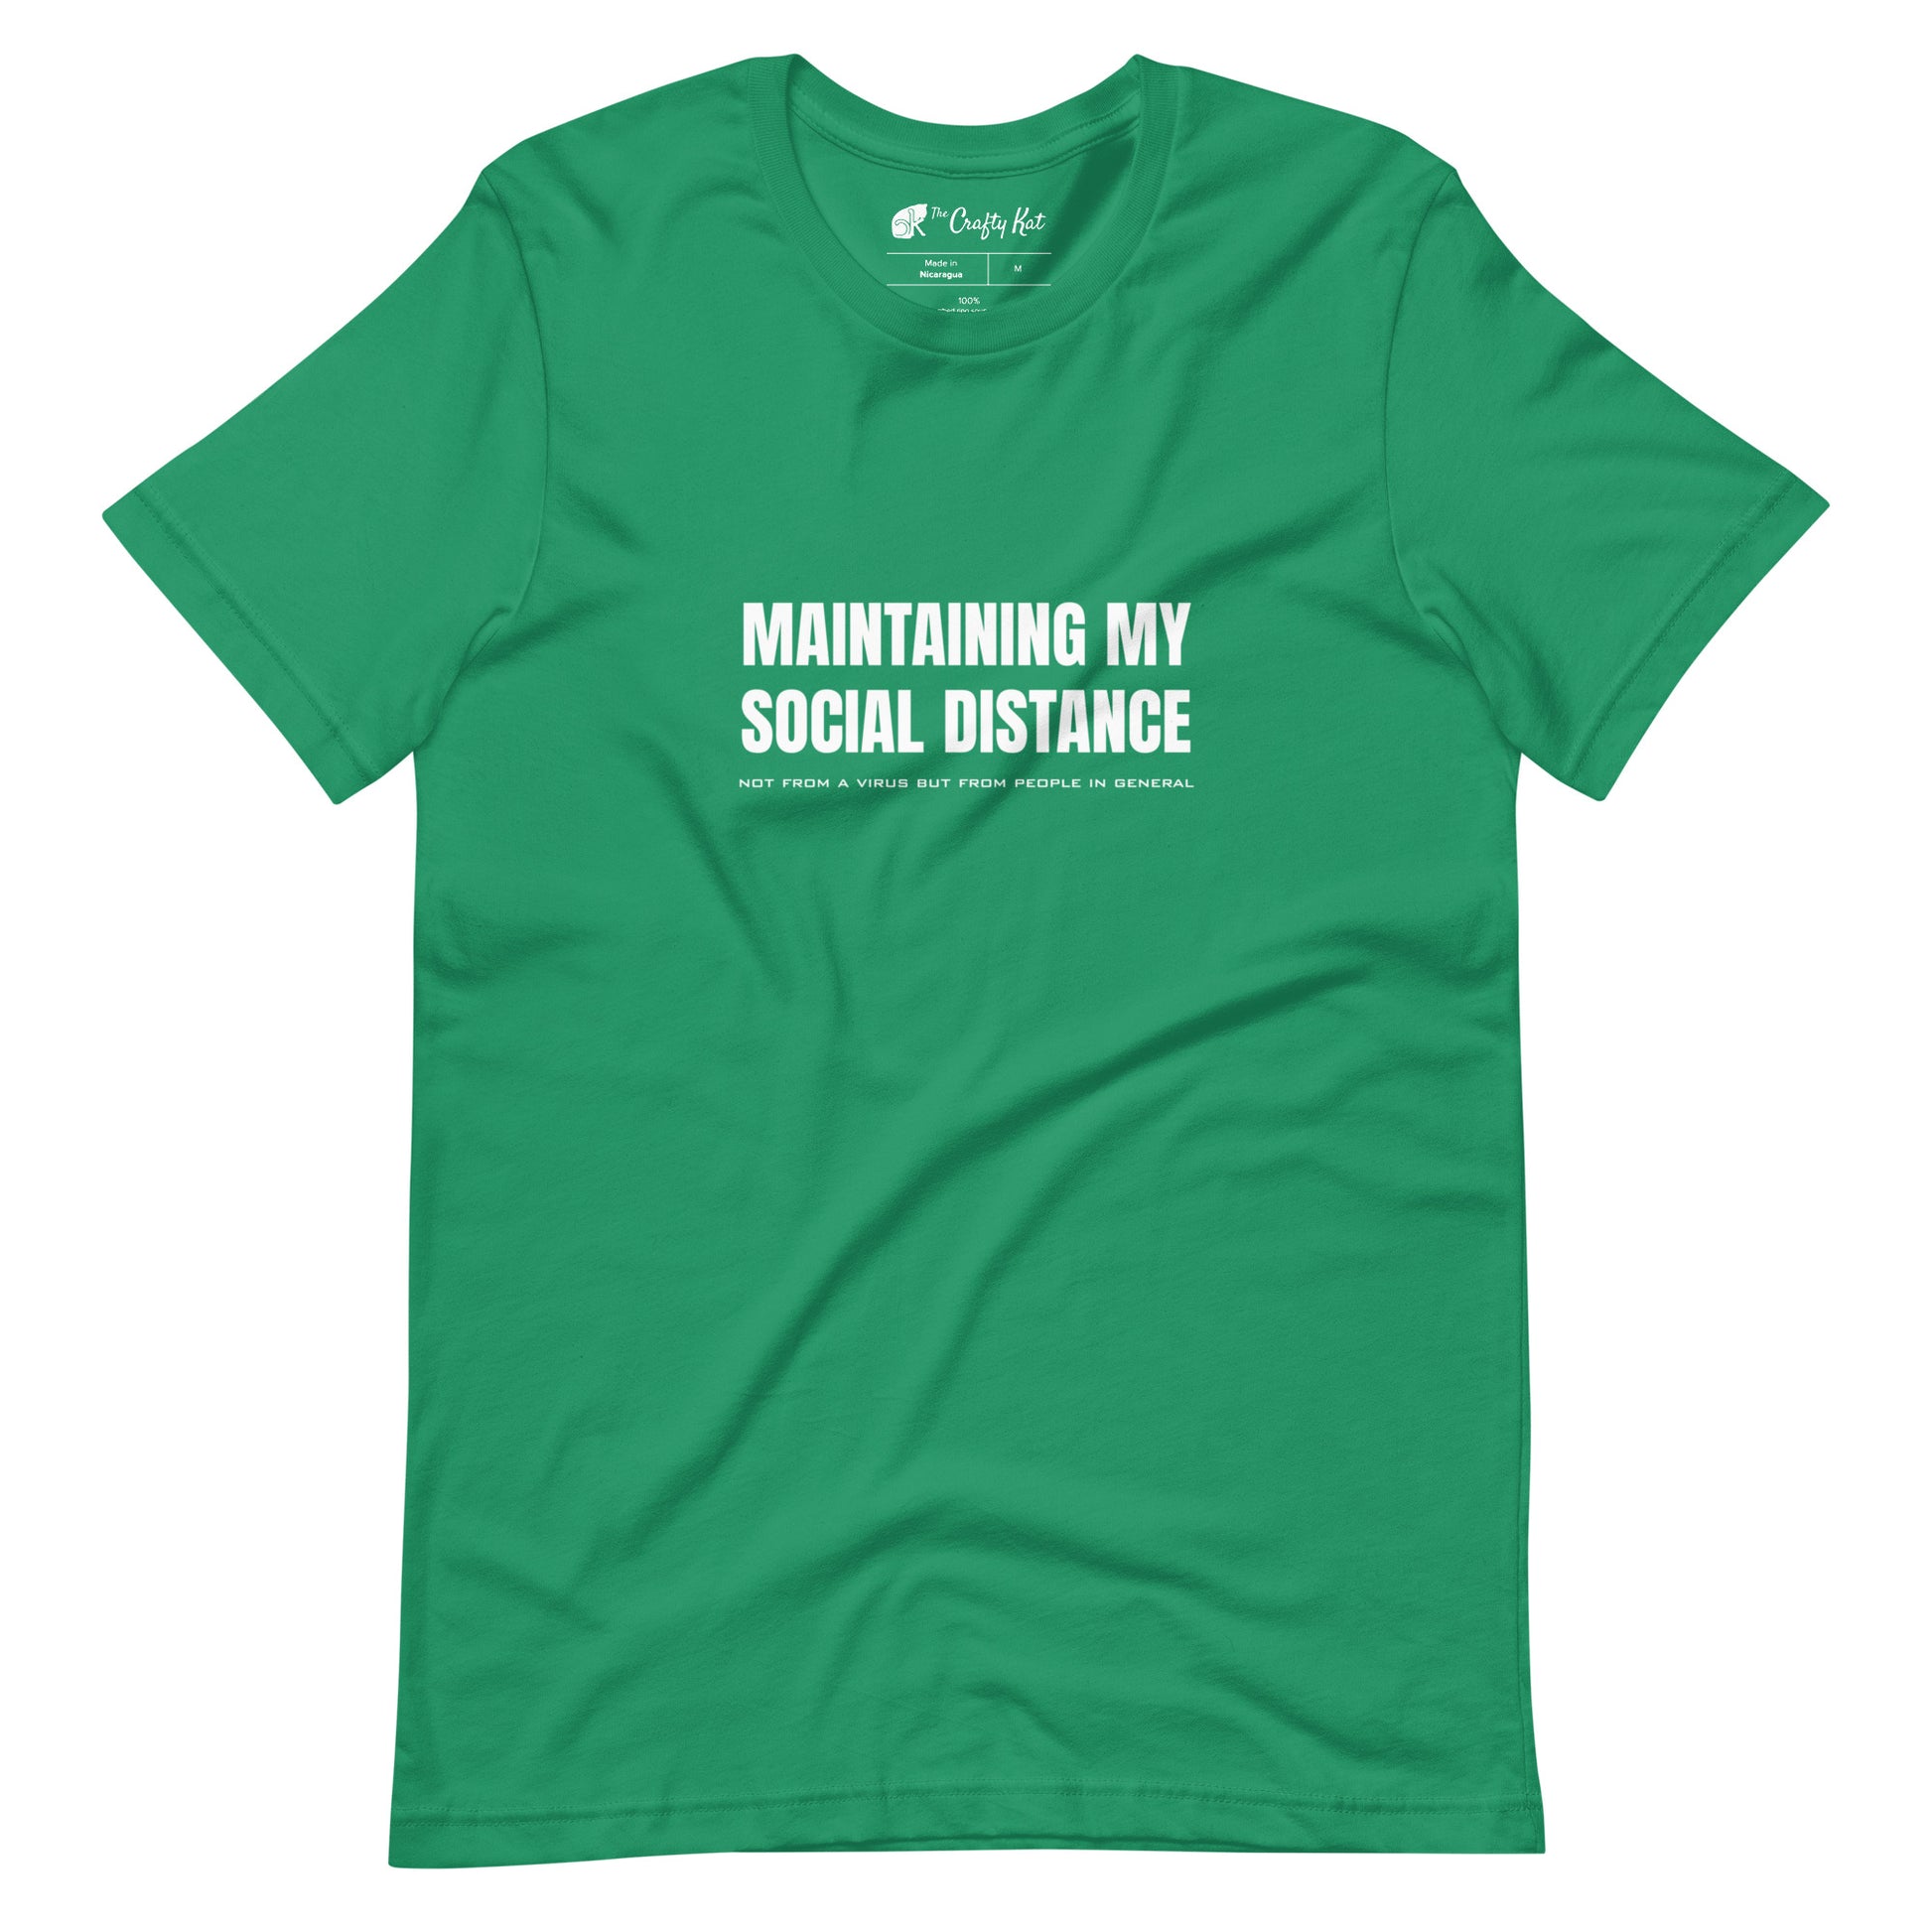 Kelly green t-shirt with white graphic: "MAINTAINING MY SOCIAL DISTANCE not from a virus but from people in general"